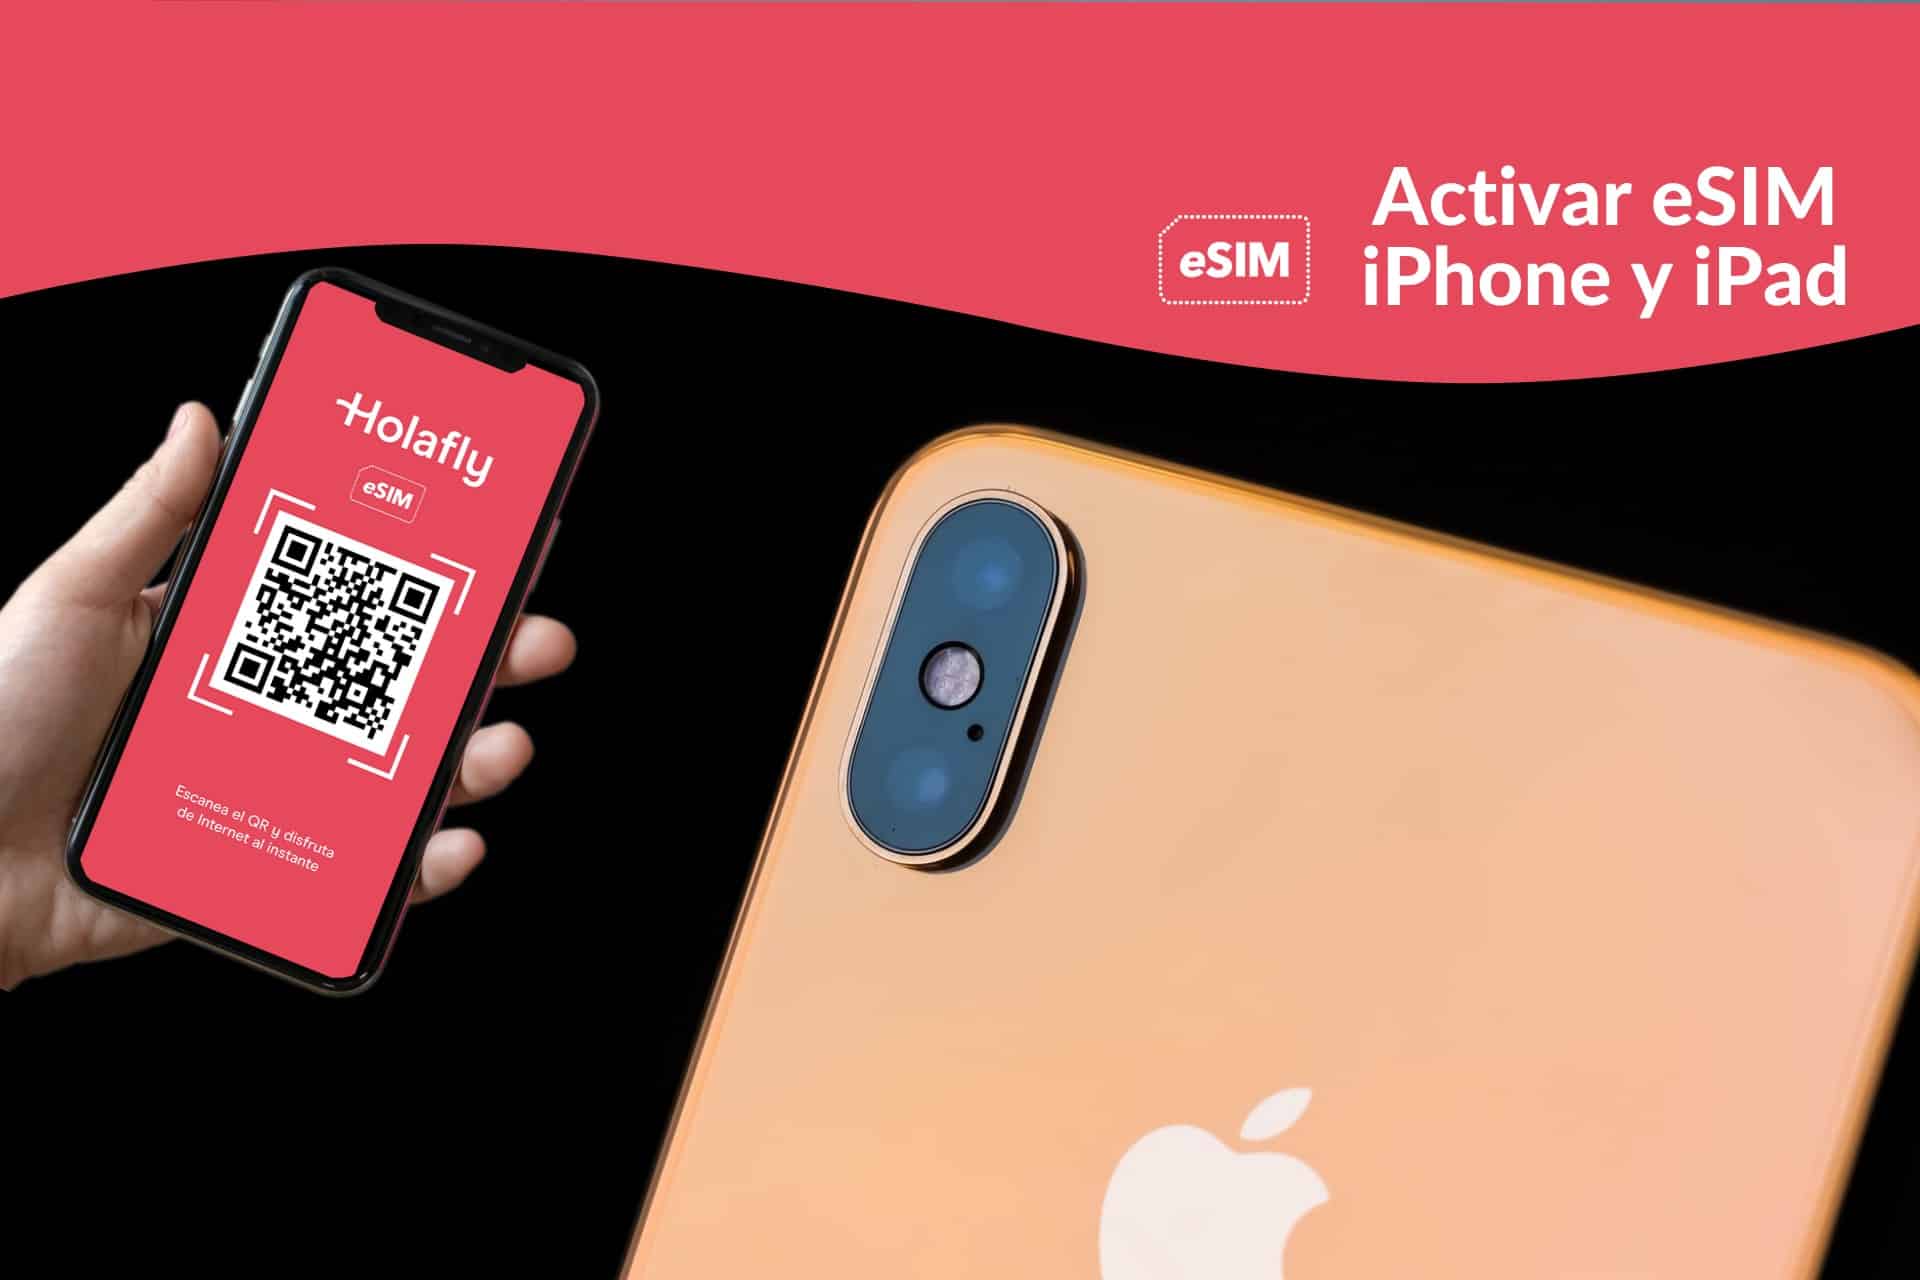 How to Activate Your Esim Service Holafly, besbest Oman esim, Oman esim, Oman esim unlimited data, unlimited data esim Oman, best esim for Oman, Oman tourist esim, esim Oman, Omani esim, Oman esim for tourist, Oman esim for tourist, Oman prepaid esim, Prepaid eSim in Oman, cheapest esim in Oman, best data plan esim Oman, Airalo Oman Esim, Holafly Oman eSim, Nomad eSim Oman, MTX Connect eSim Oman, data eSim in Oman, Airalo Oman esim discount code, Holafly Oman discount code, Nomad Oman esim discount code, O2 Oman esim, Orange eSim Oman